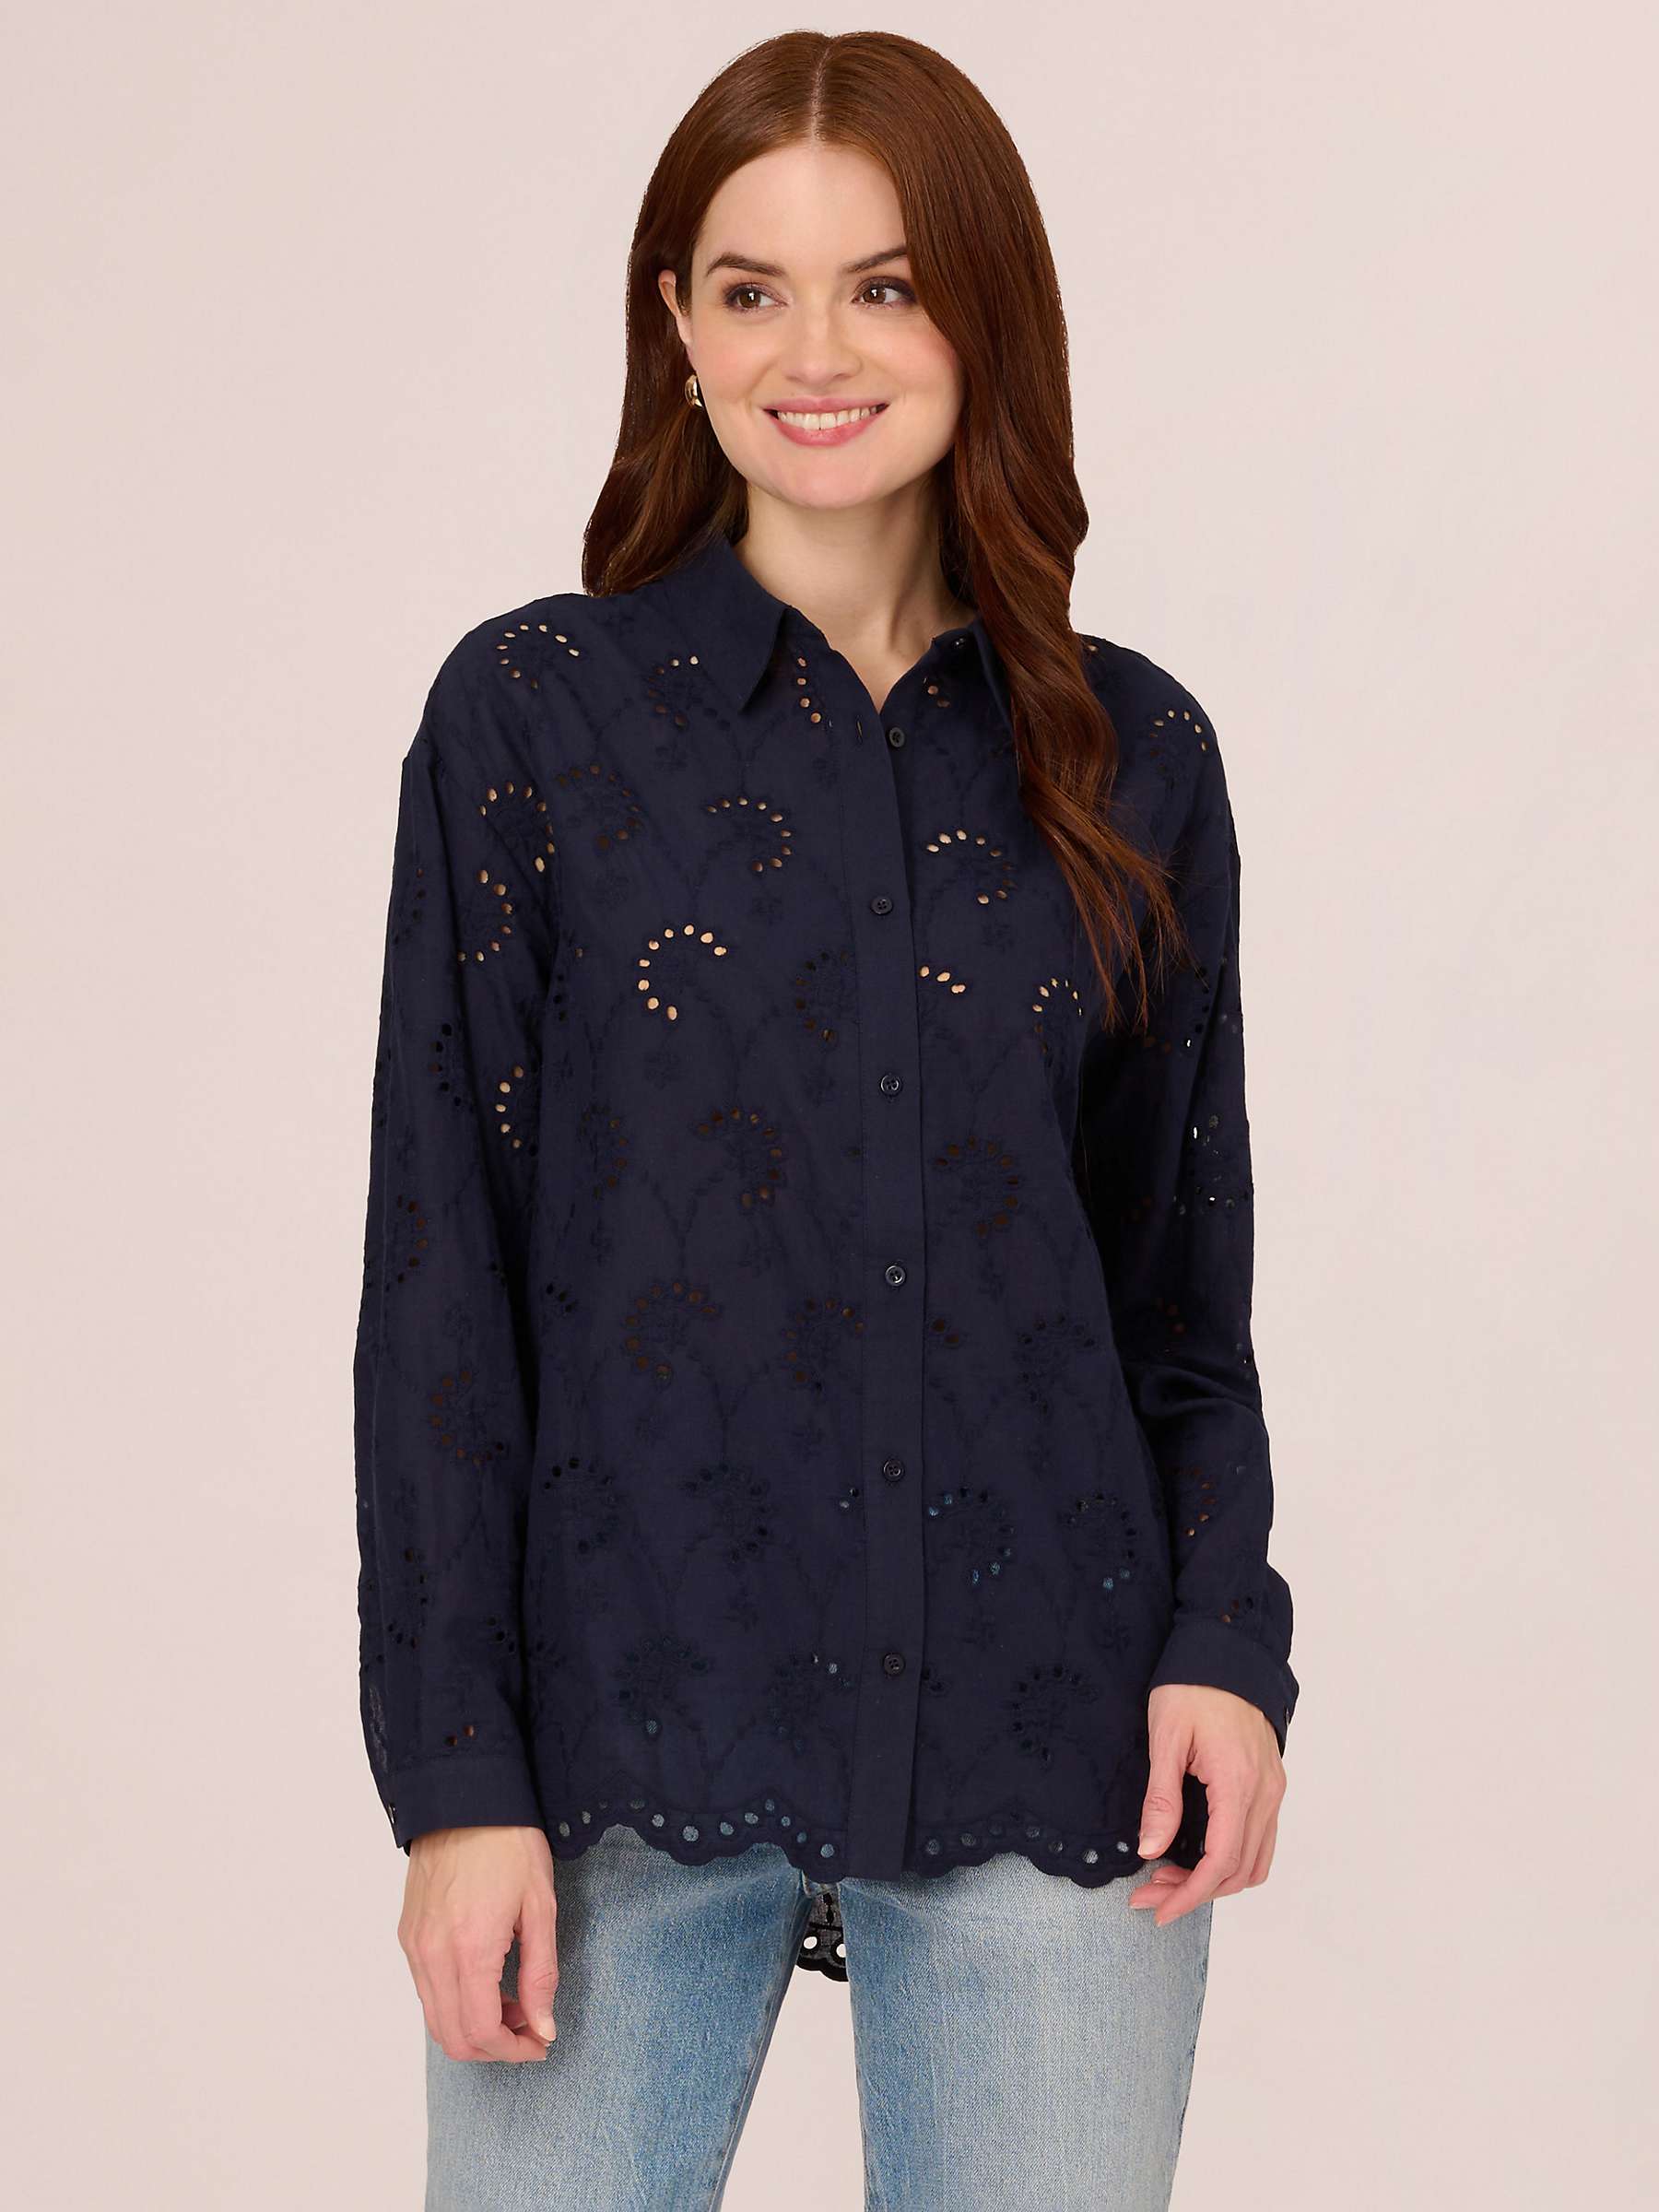 Buy Adrianna Papell Eyelet Button Front Tunic Blouse, Navy Online at johnlewis.com